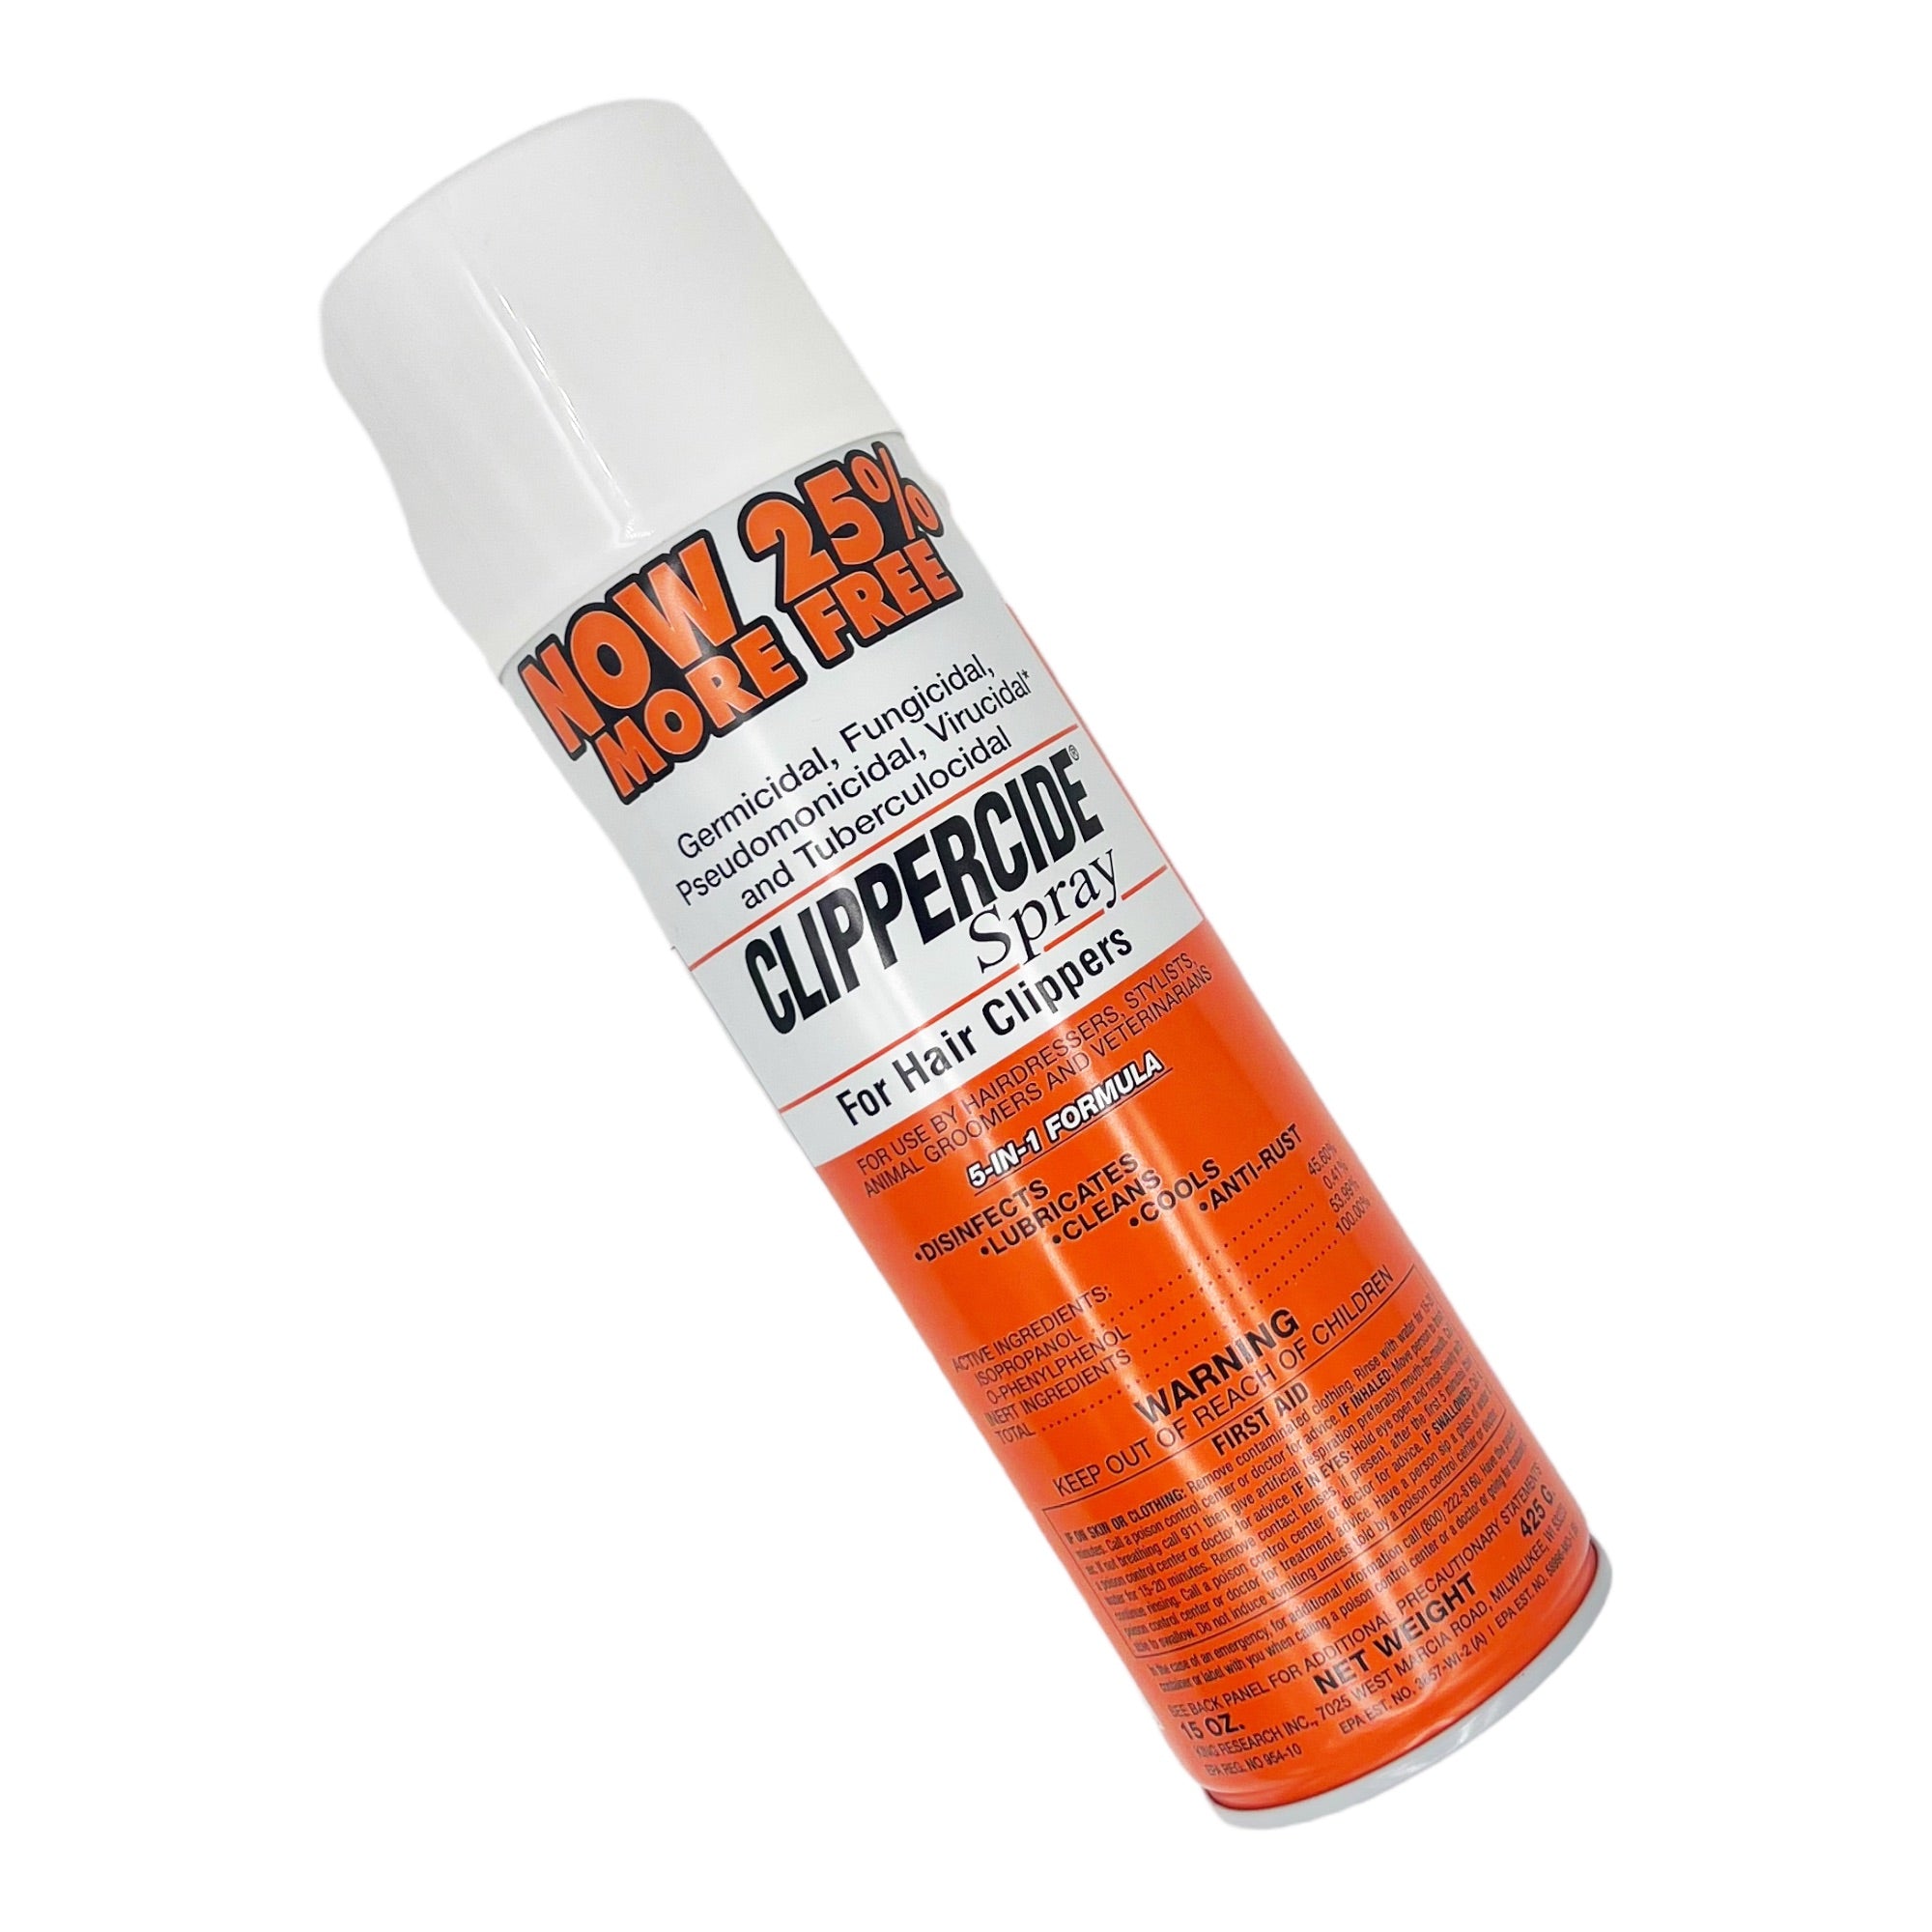 Clippercide - Spray for Hair Clippers 5-in-1 Formula 425g - Eson Direct